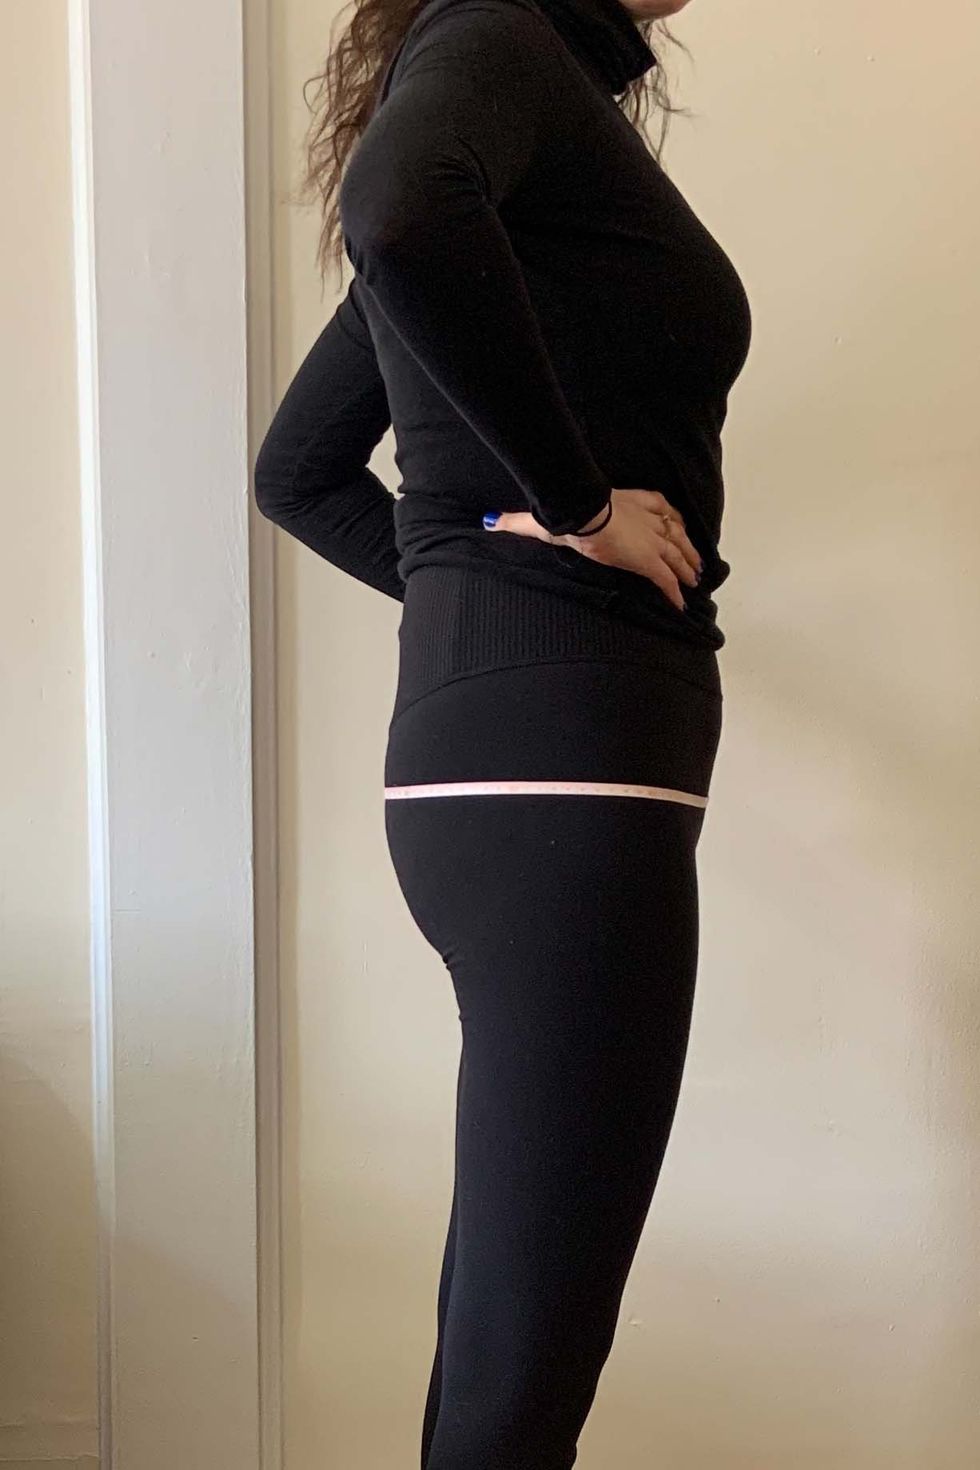 a woman wearing black leggings and a black turtleneck demonstrating how to measure your hips with the measuring tape over the fullest part of her booty